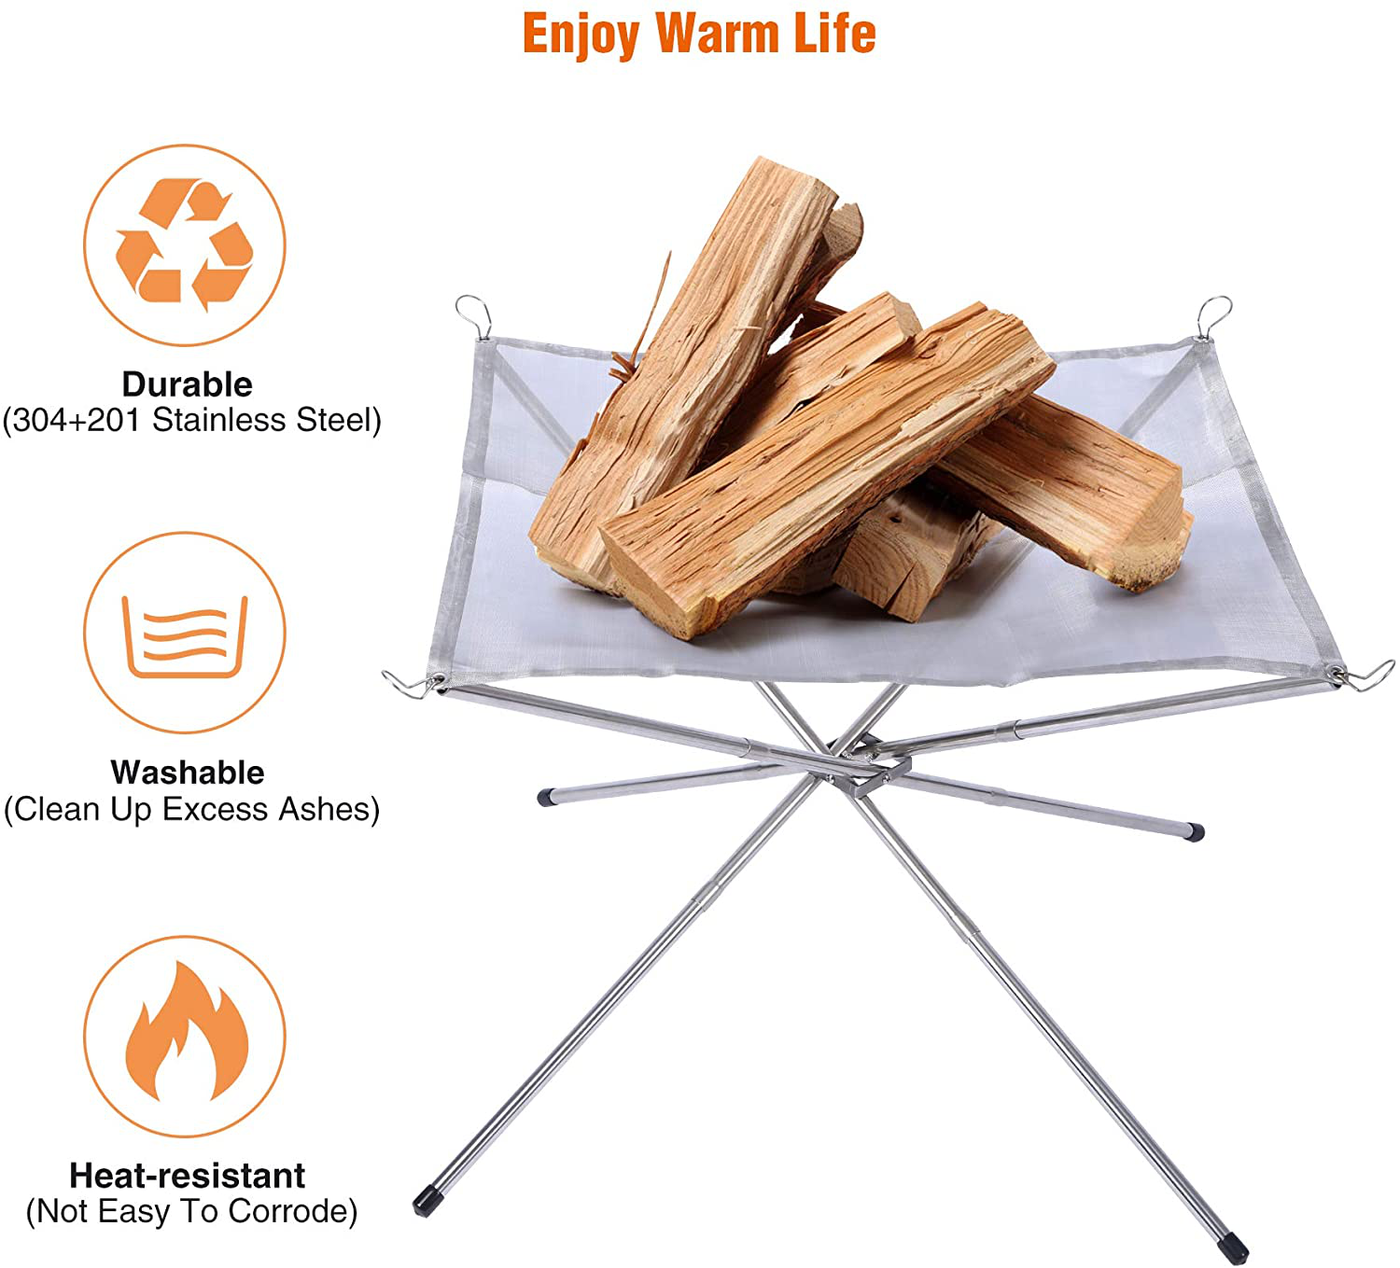 CAMPMAX Portable Fire Pit for Camping, 28 Inch Stainless Steel Pop up Mesh Fire Pit Foldable Mesh Fireplace with Carrying Bag